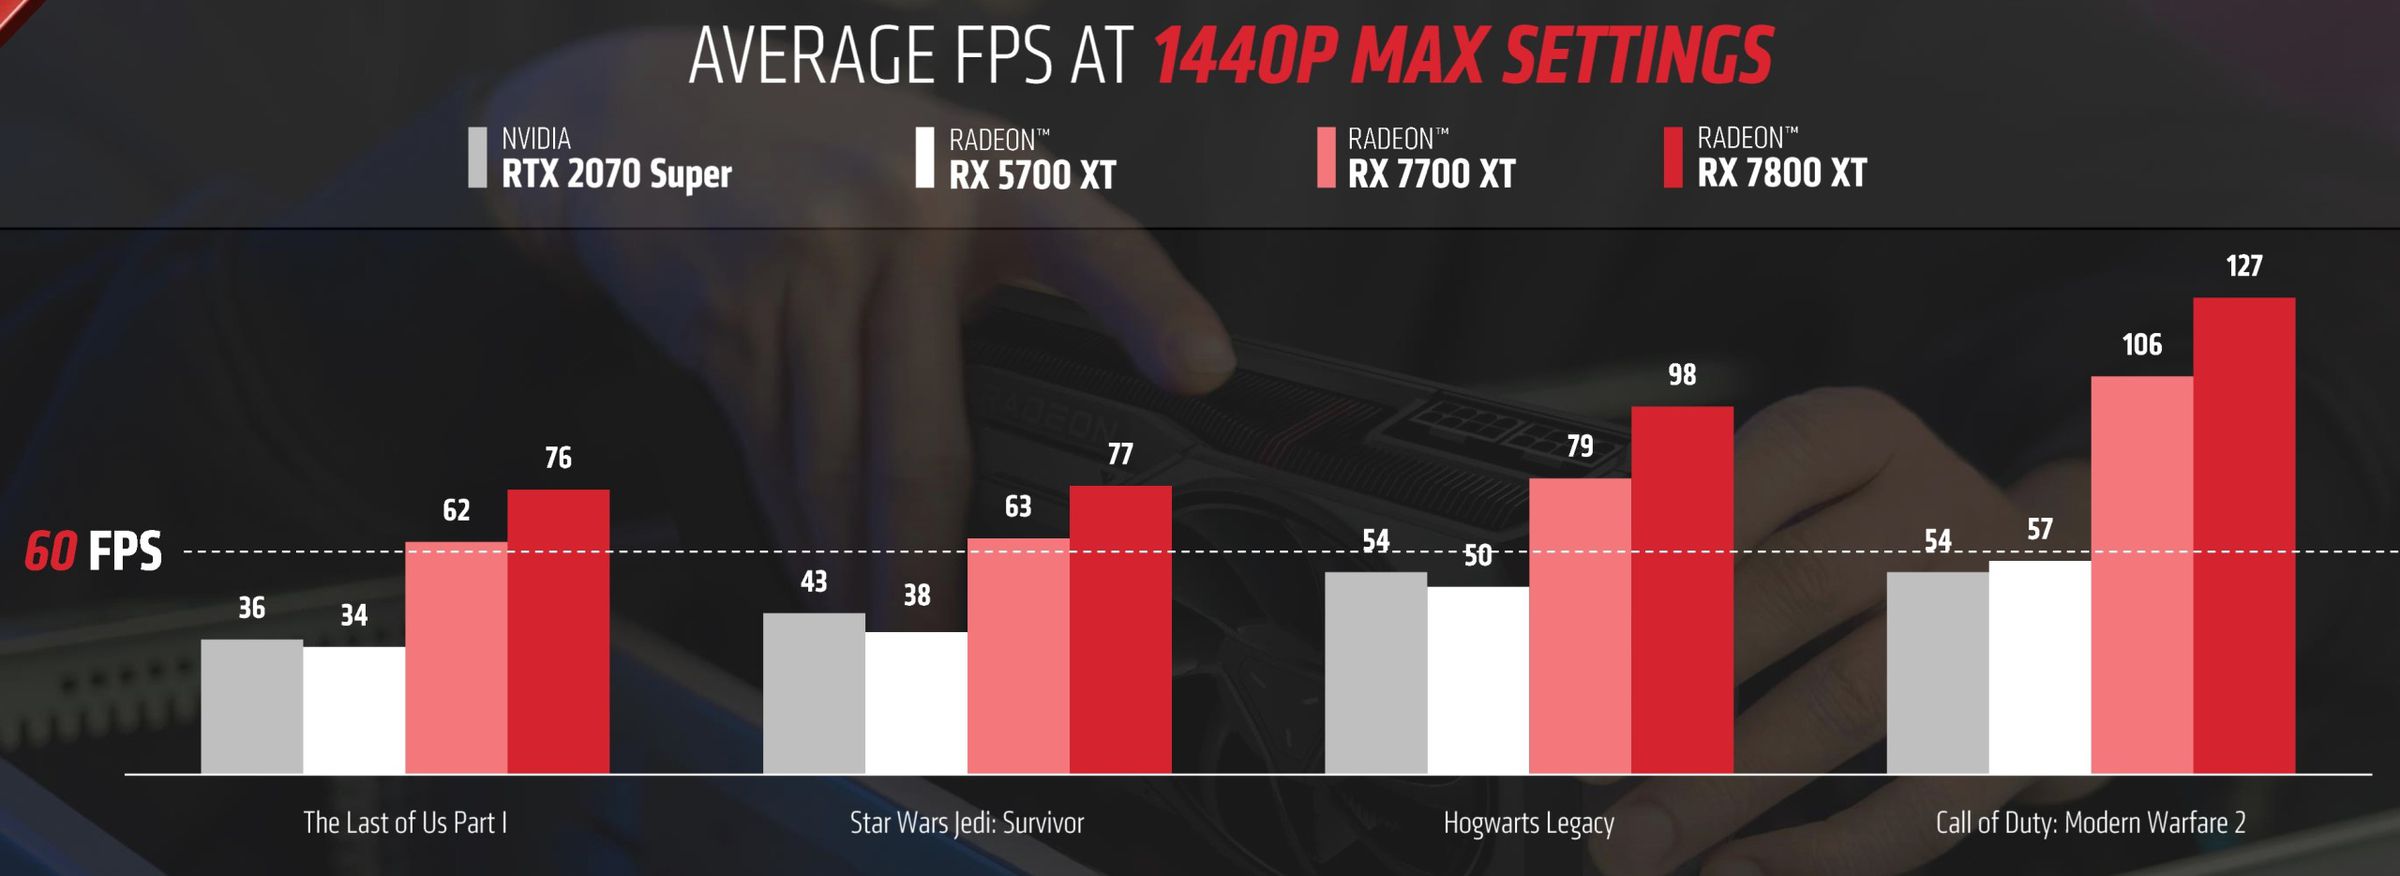 AMD’s results assume you pair the GPU with a Ryzen 9 7900X CPU and 32GB of DDR5 memory.